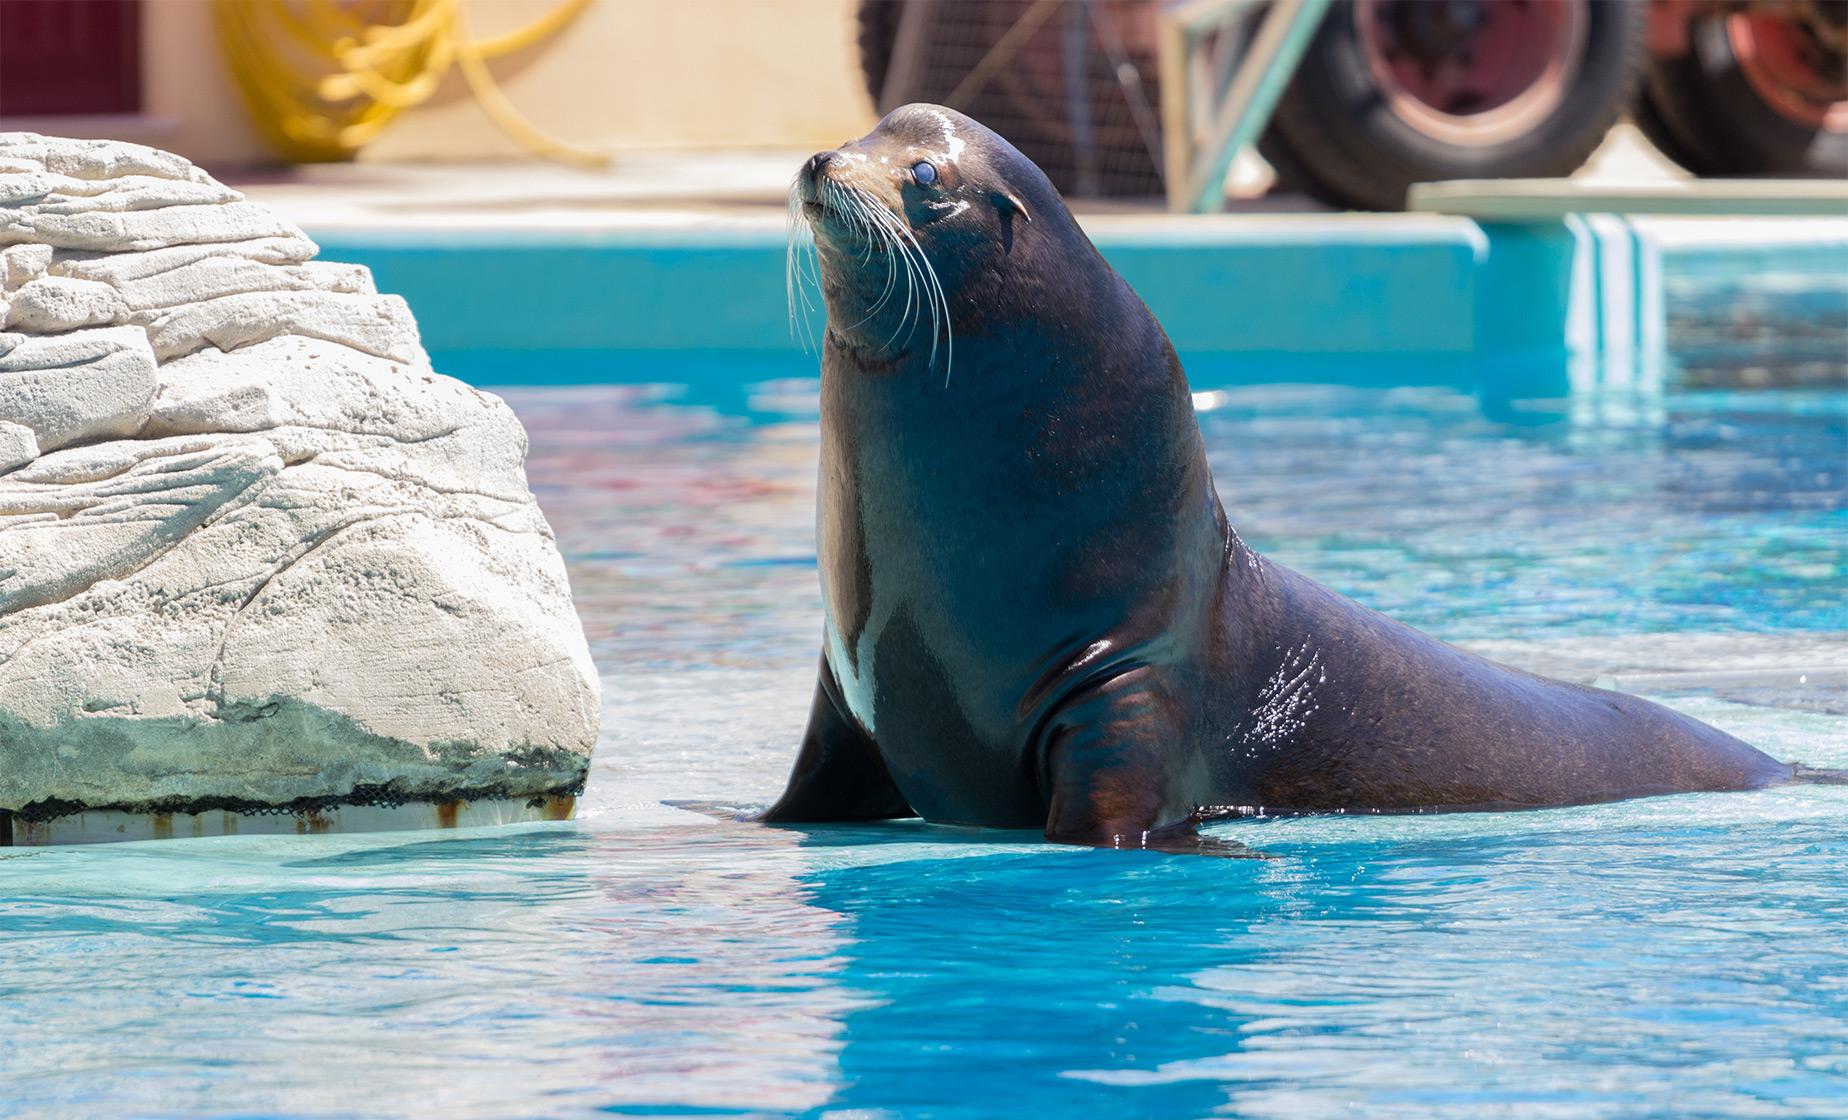 Sea Lion Encounter and Water Park Tour in Puerto Vallarta